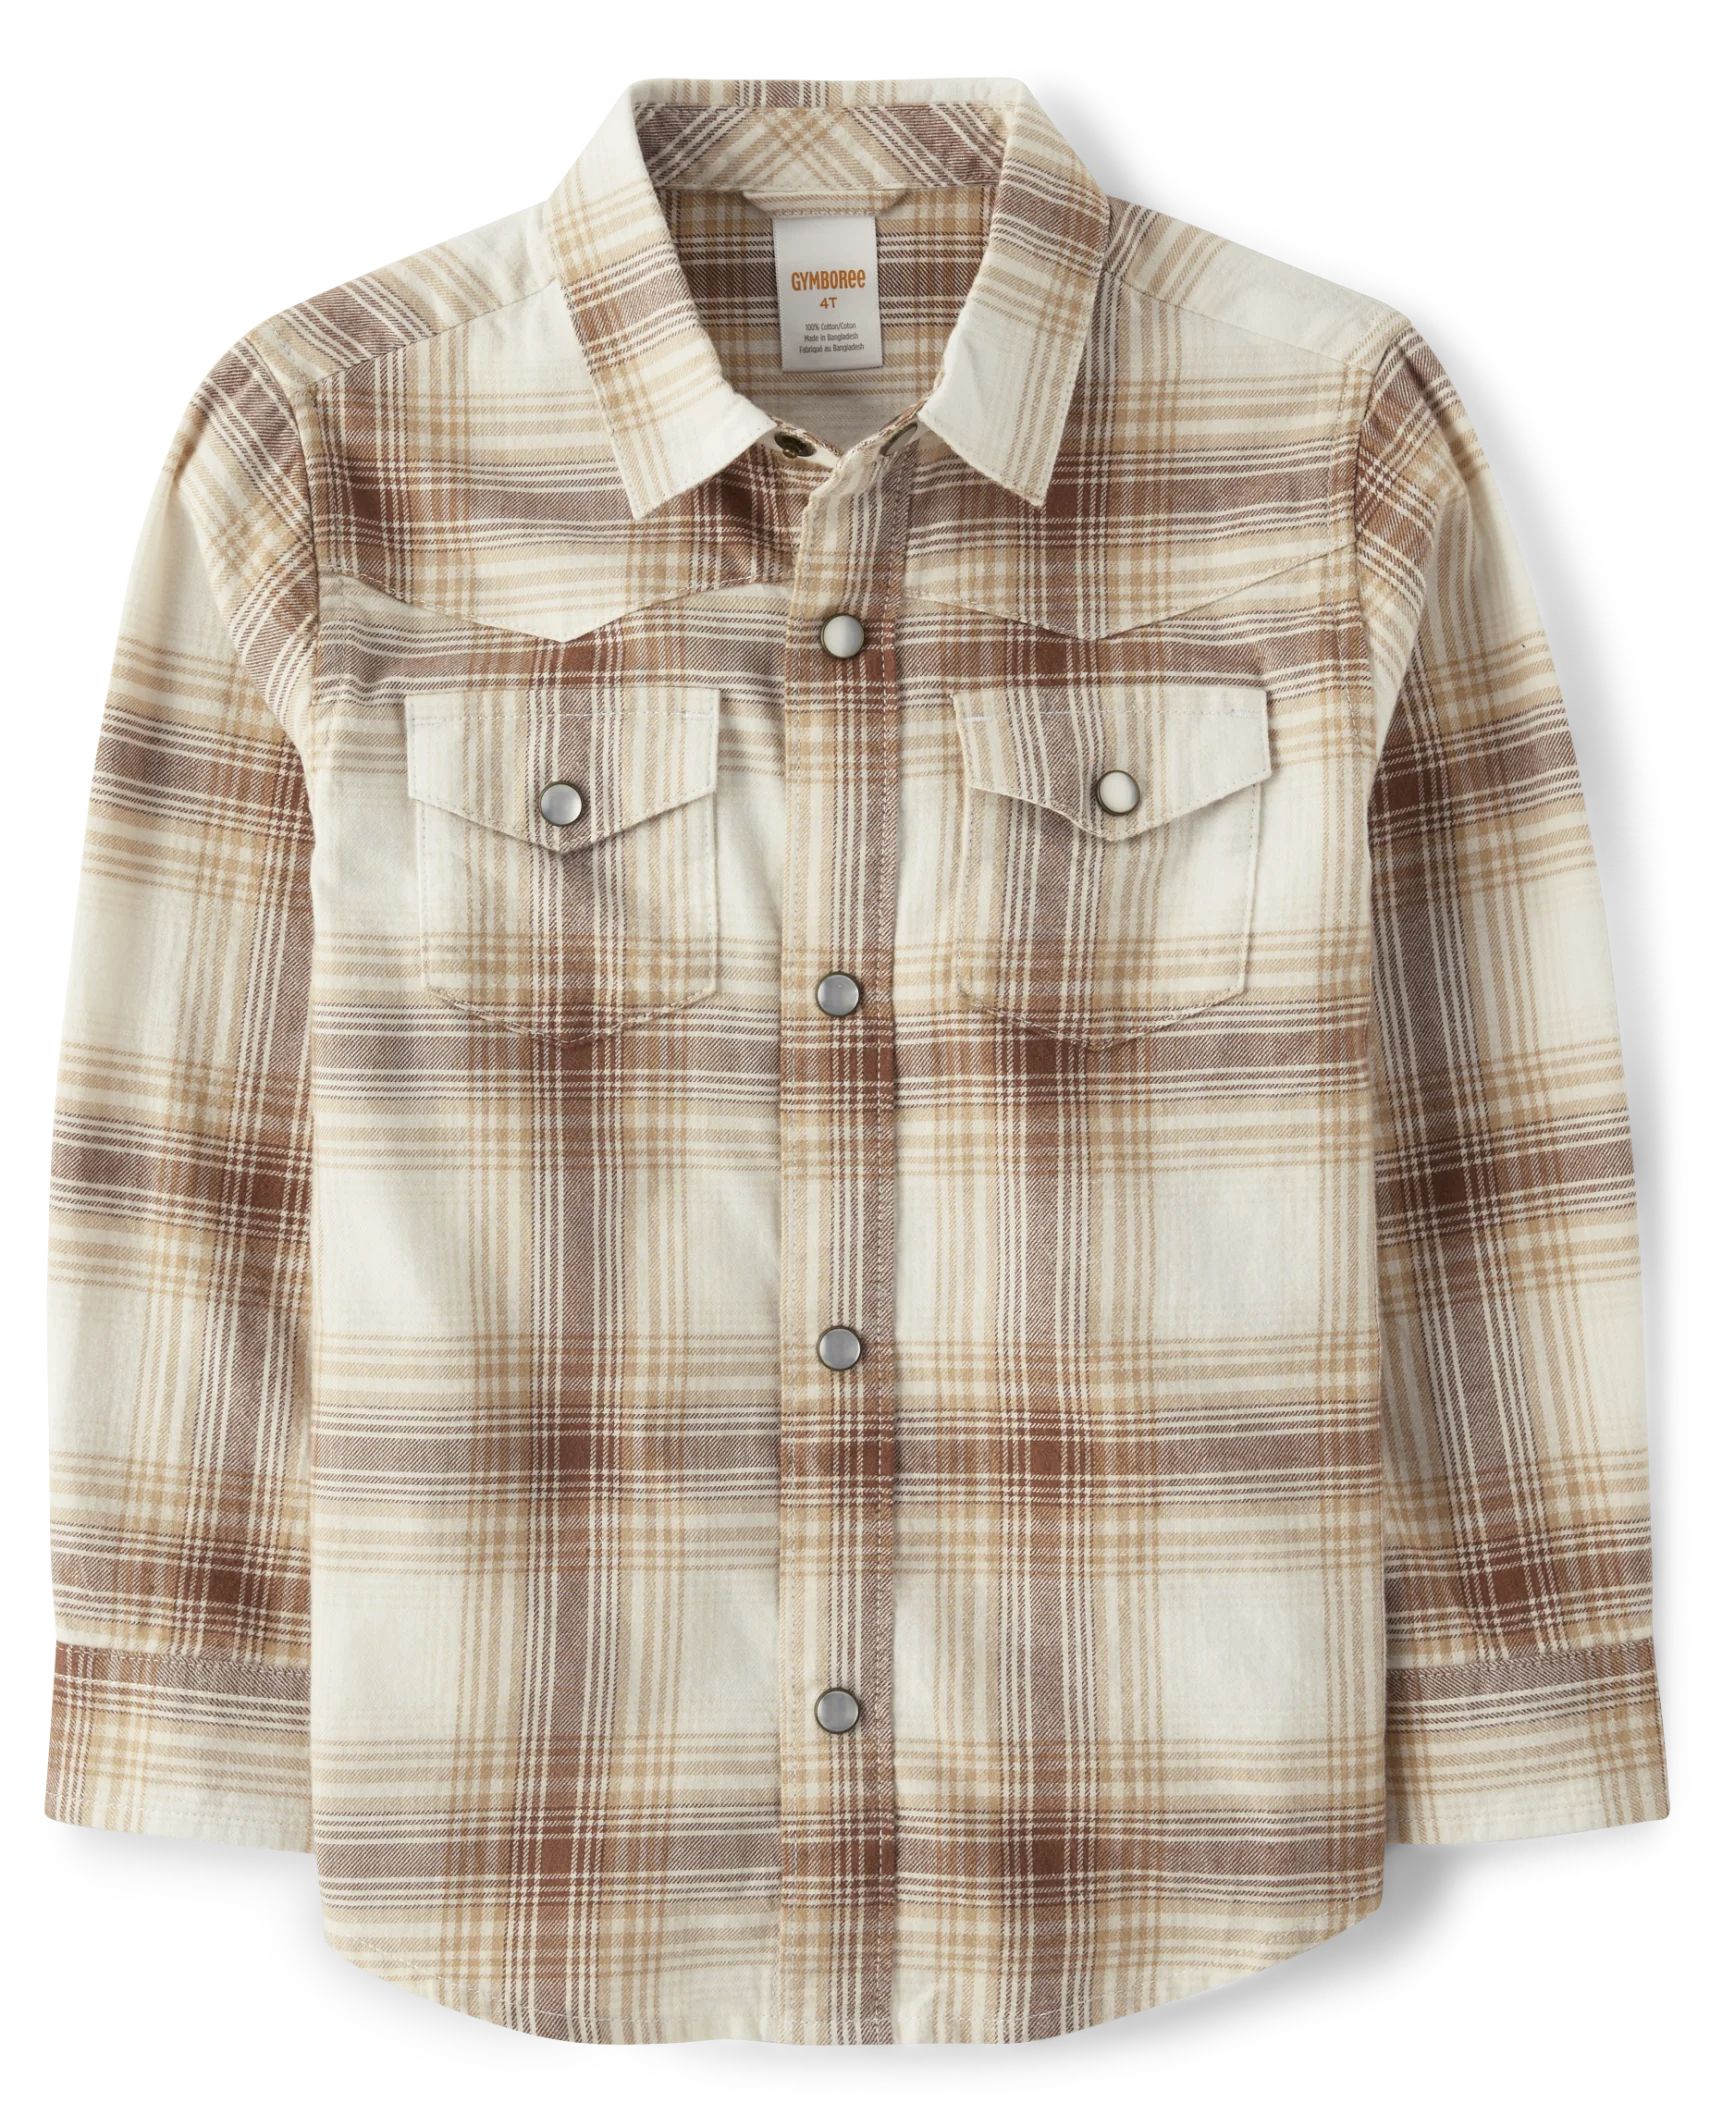 Boys Long Sleeve Plaid Twill Snap Front Shirt - Rustic Ranch | The Children's Place | The Children's Place